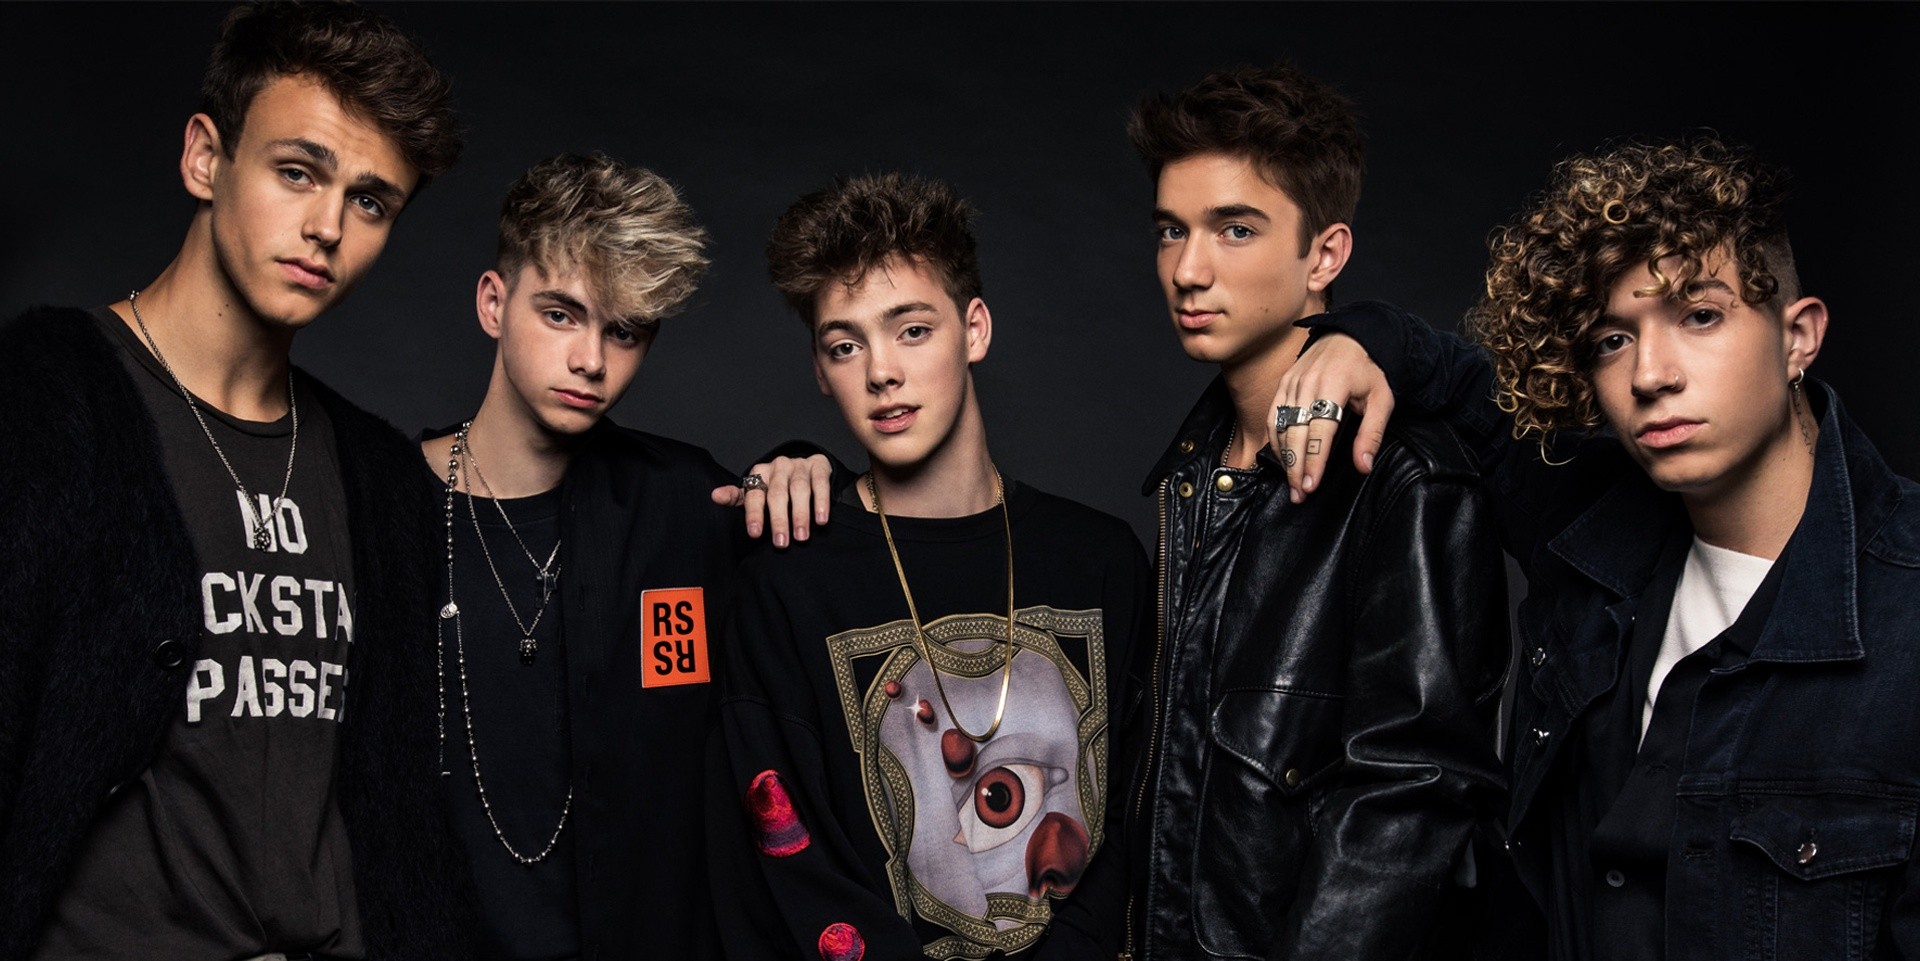 Why Don't We to return to Manila for one-night concert this November